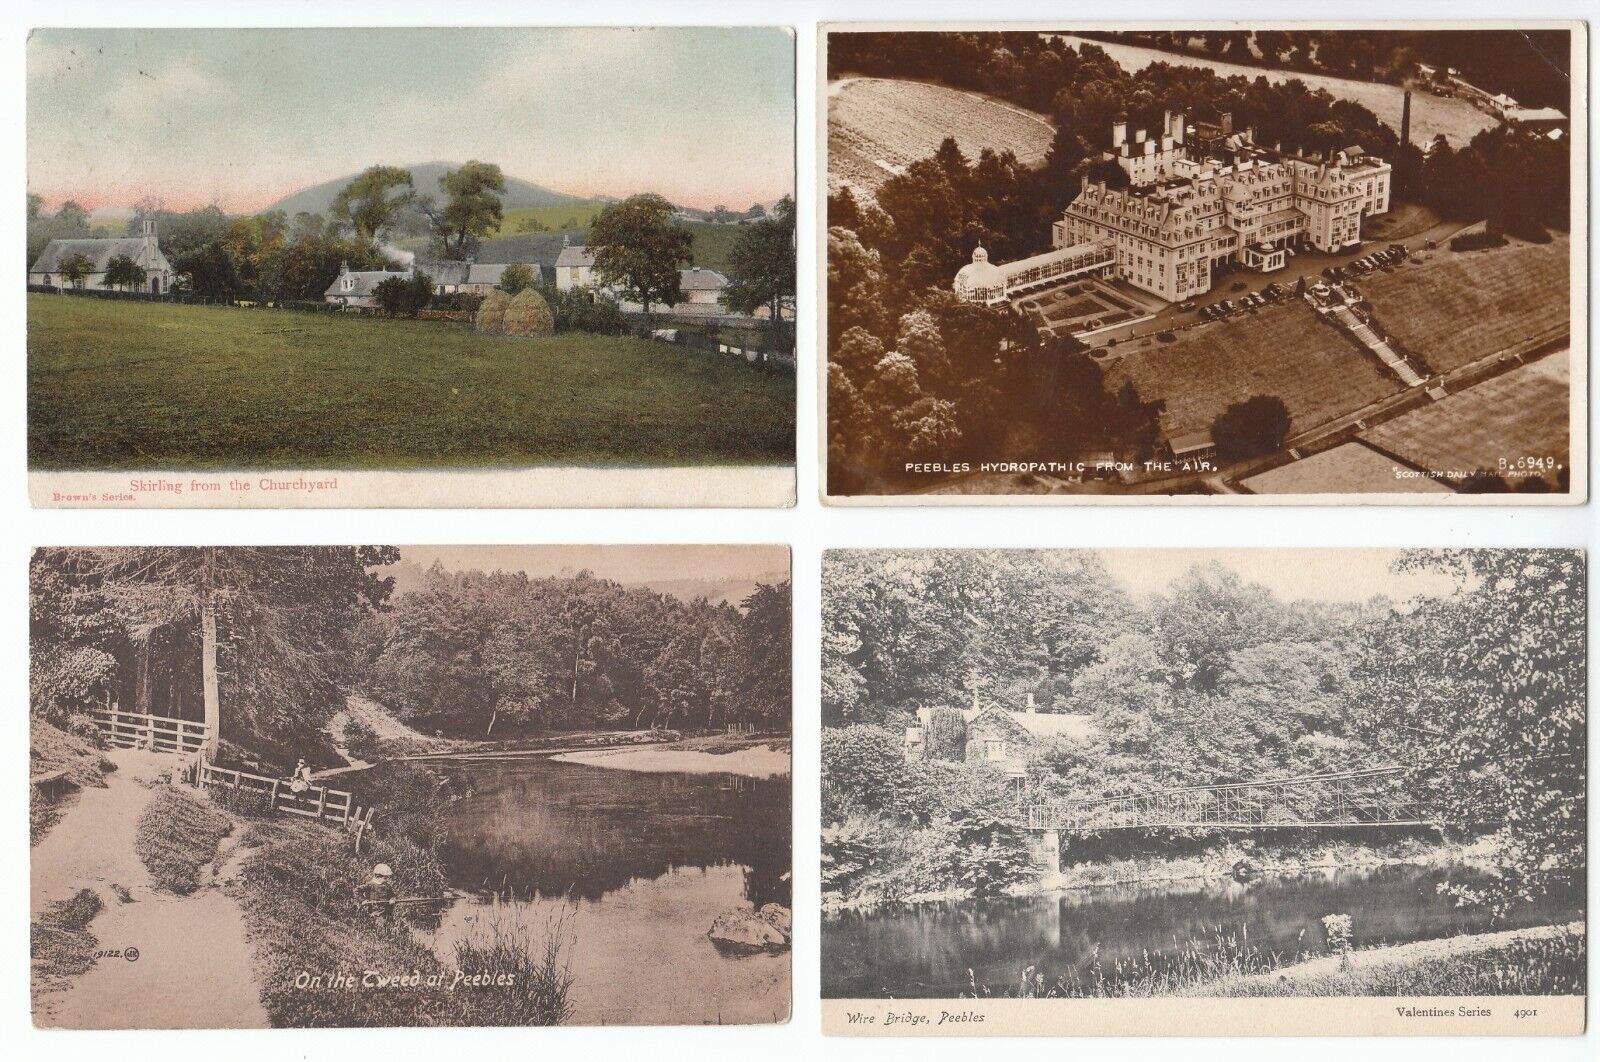 House Clearance - 10 Peebles Peeblesshire Scotland Scottish Old Services All Cards Shown (P1)